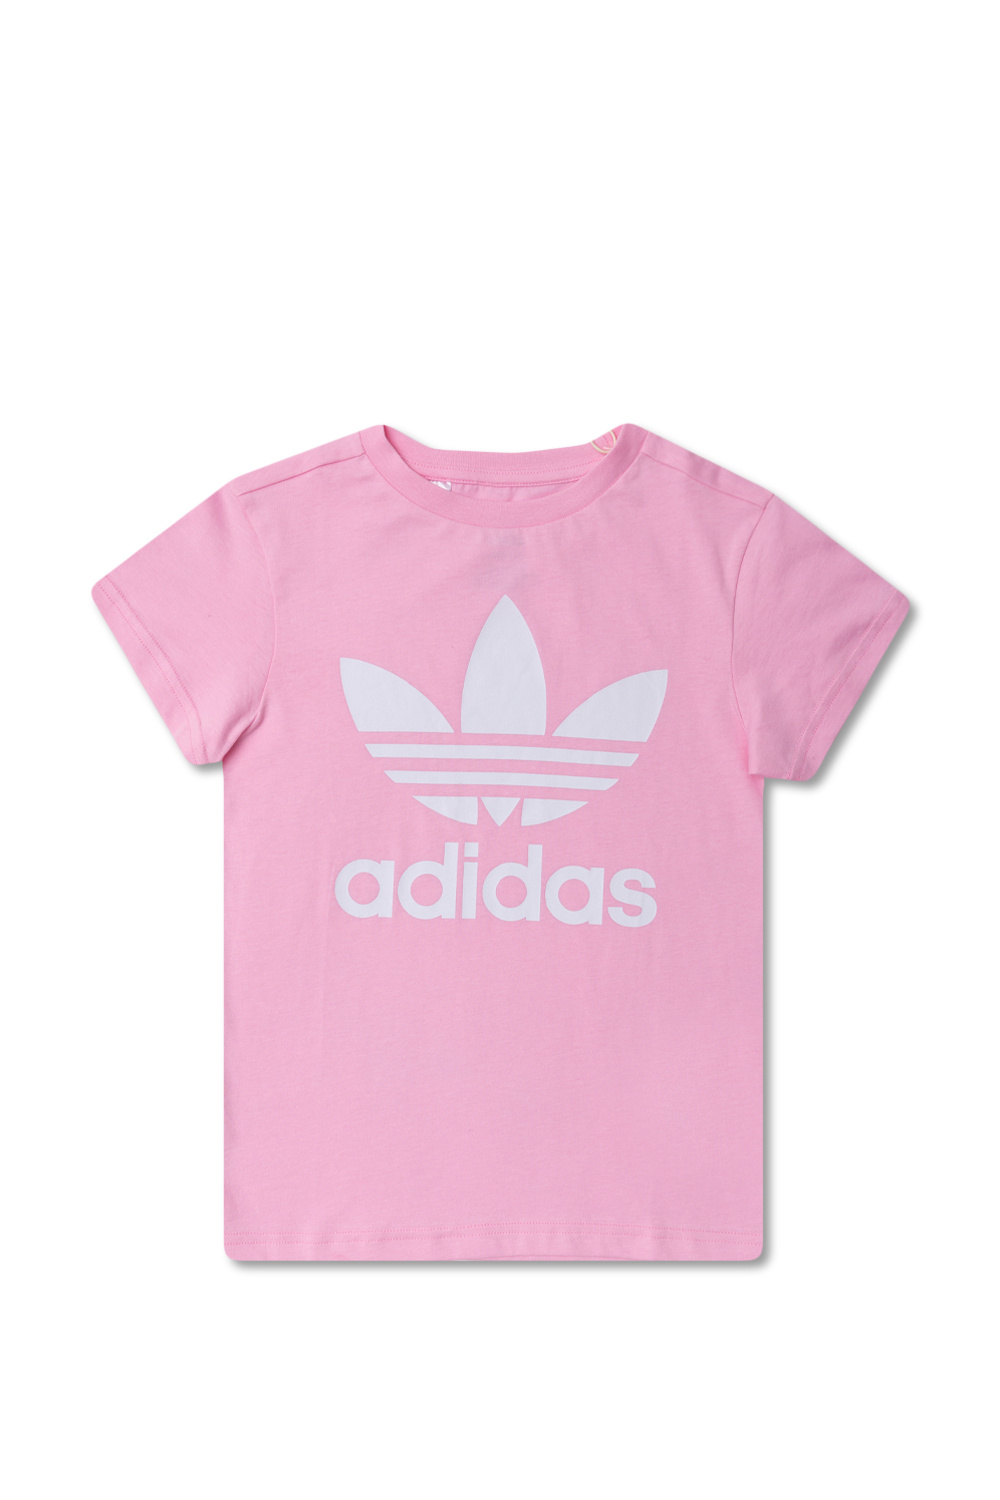 IetpShops Canada - Pink T server list - with shirt today in cheap order - adidas location status logo cheap ADIDAS Kids